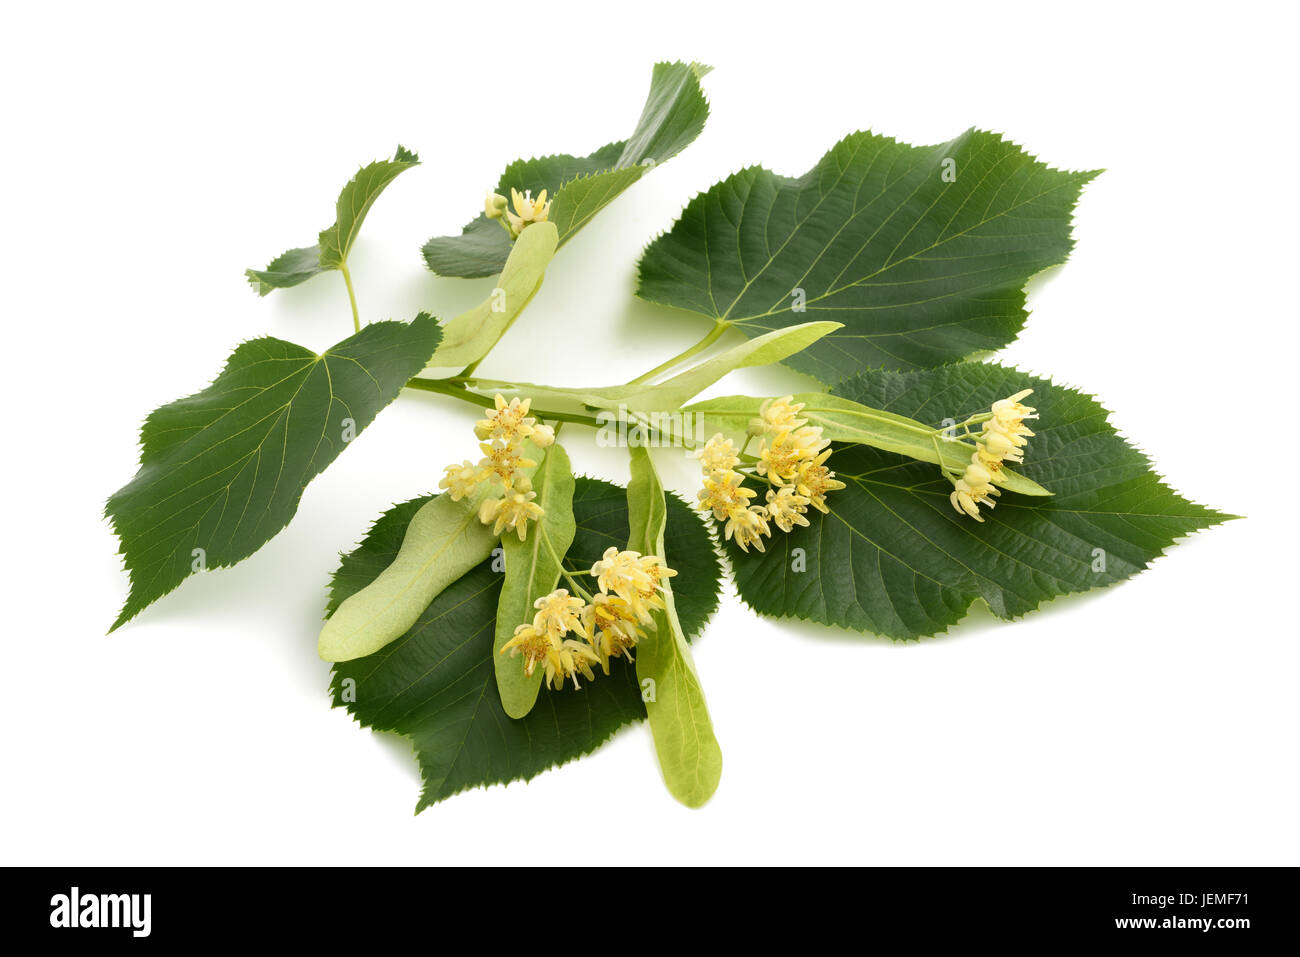 linden branch with bract and flowers isolated on white background Stock Photo